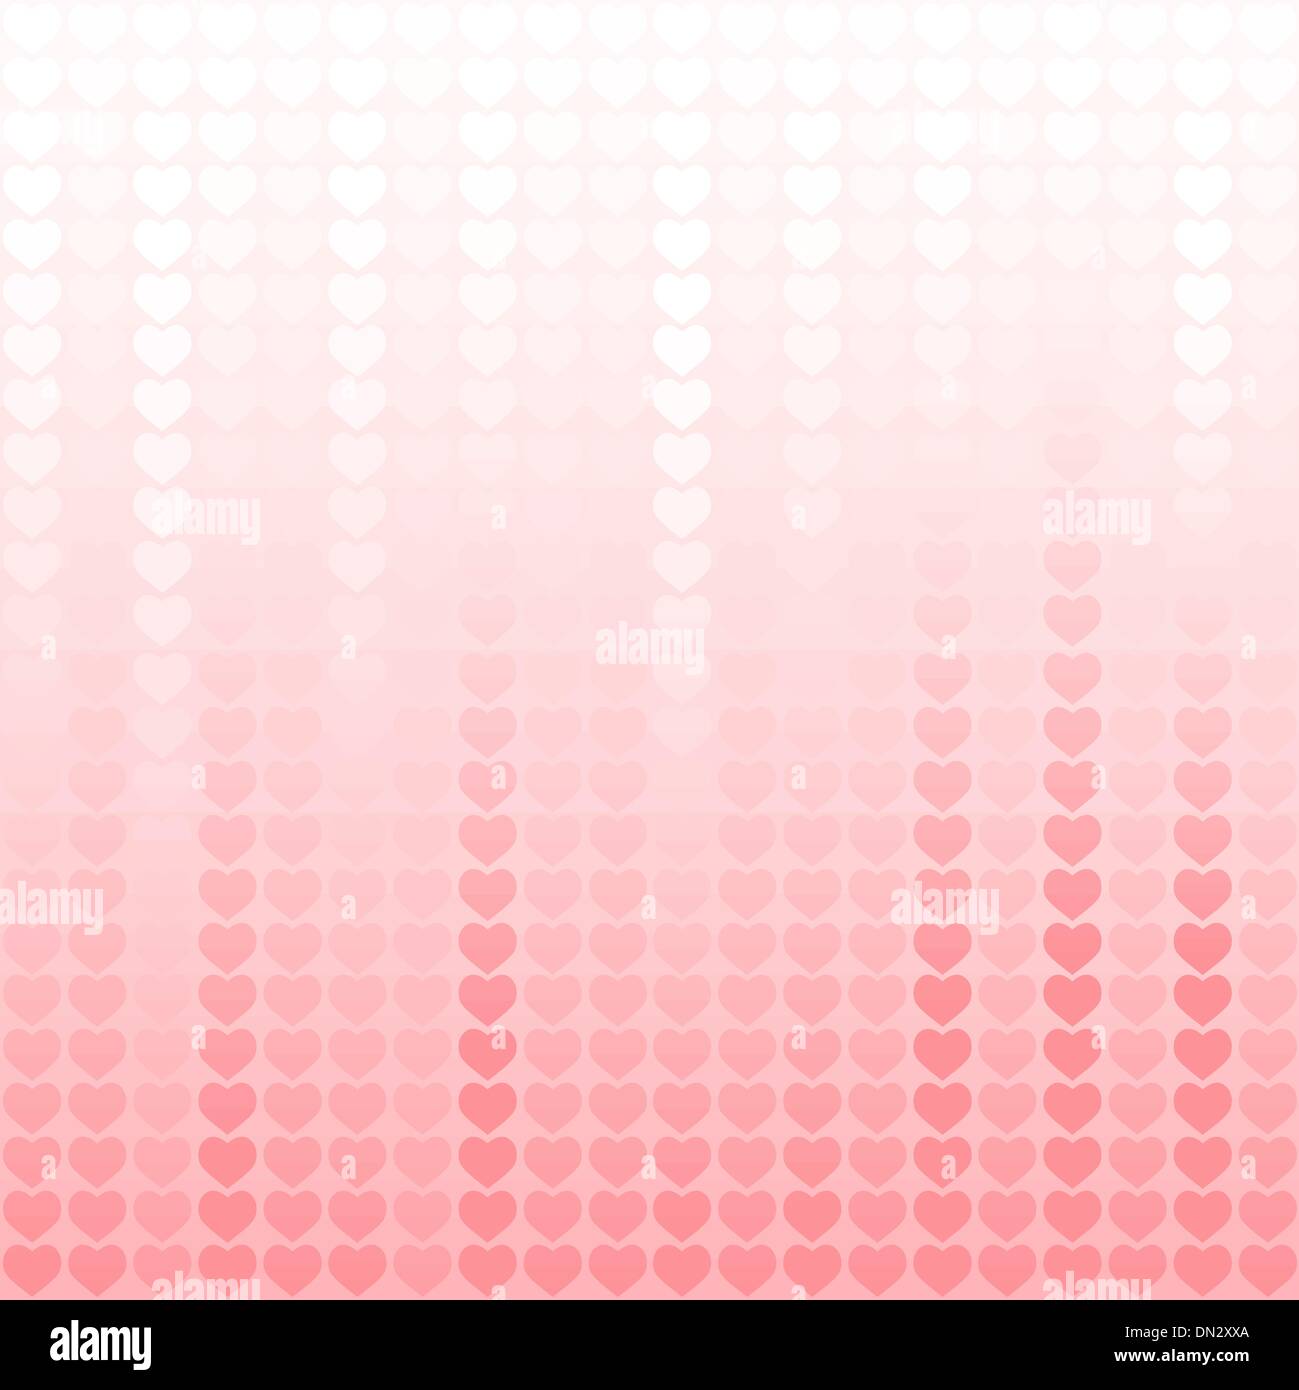 Valentine background with hearts, repetitive pattern Stock Vector